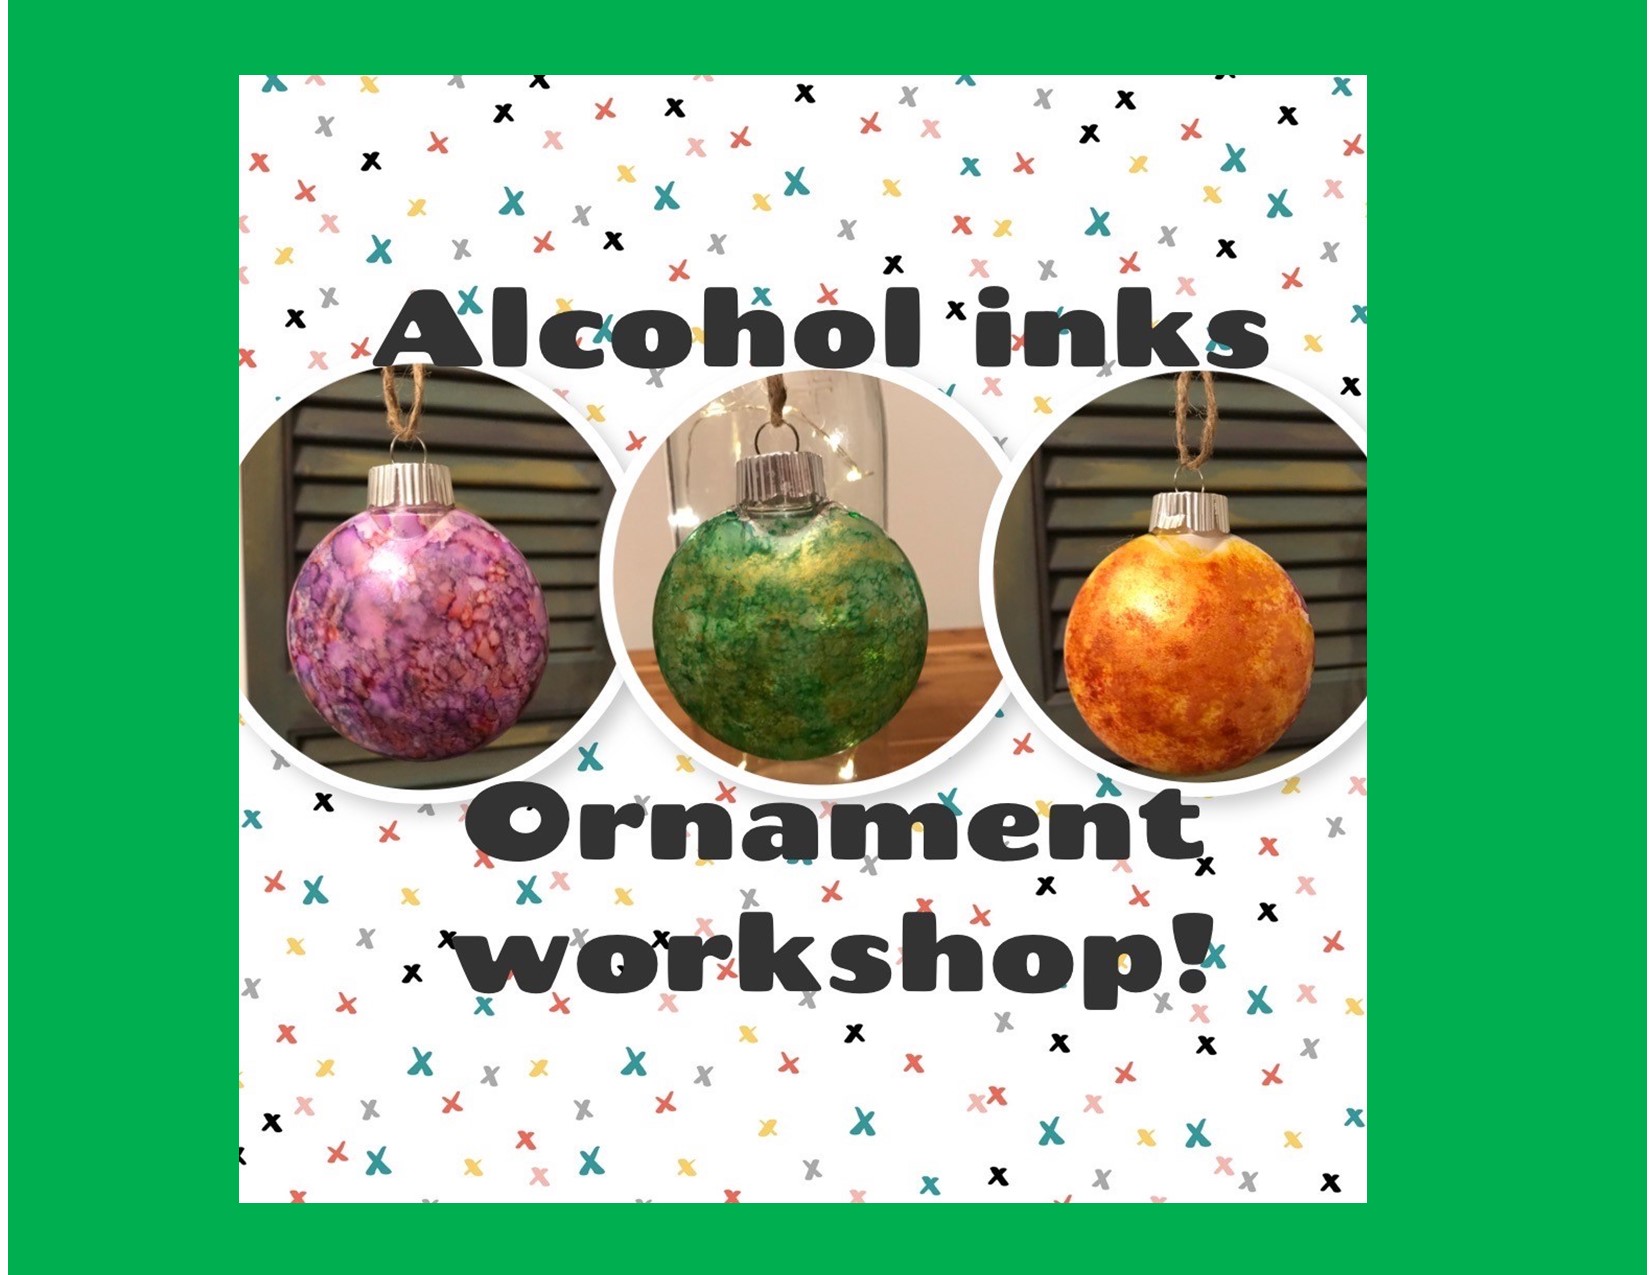 Pictures of three alcohol ink ornaments